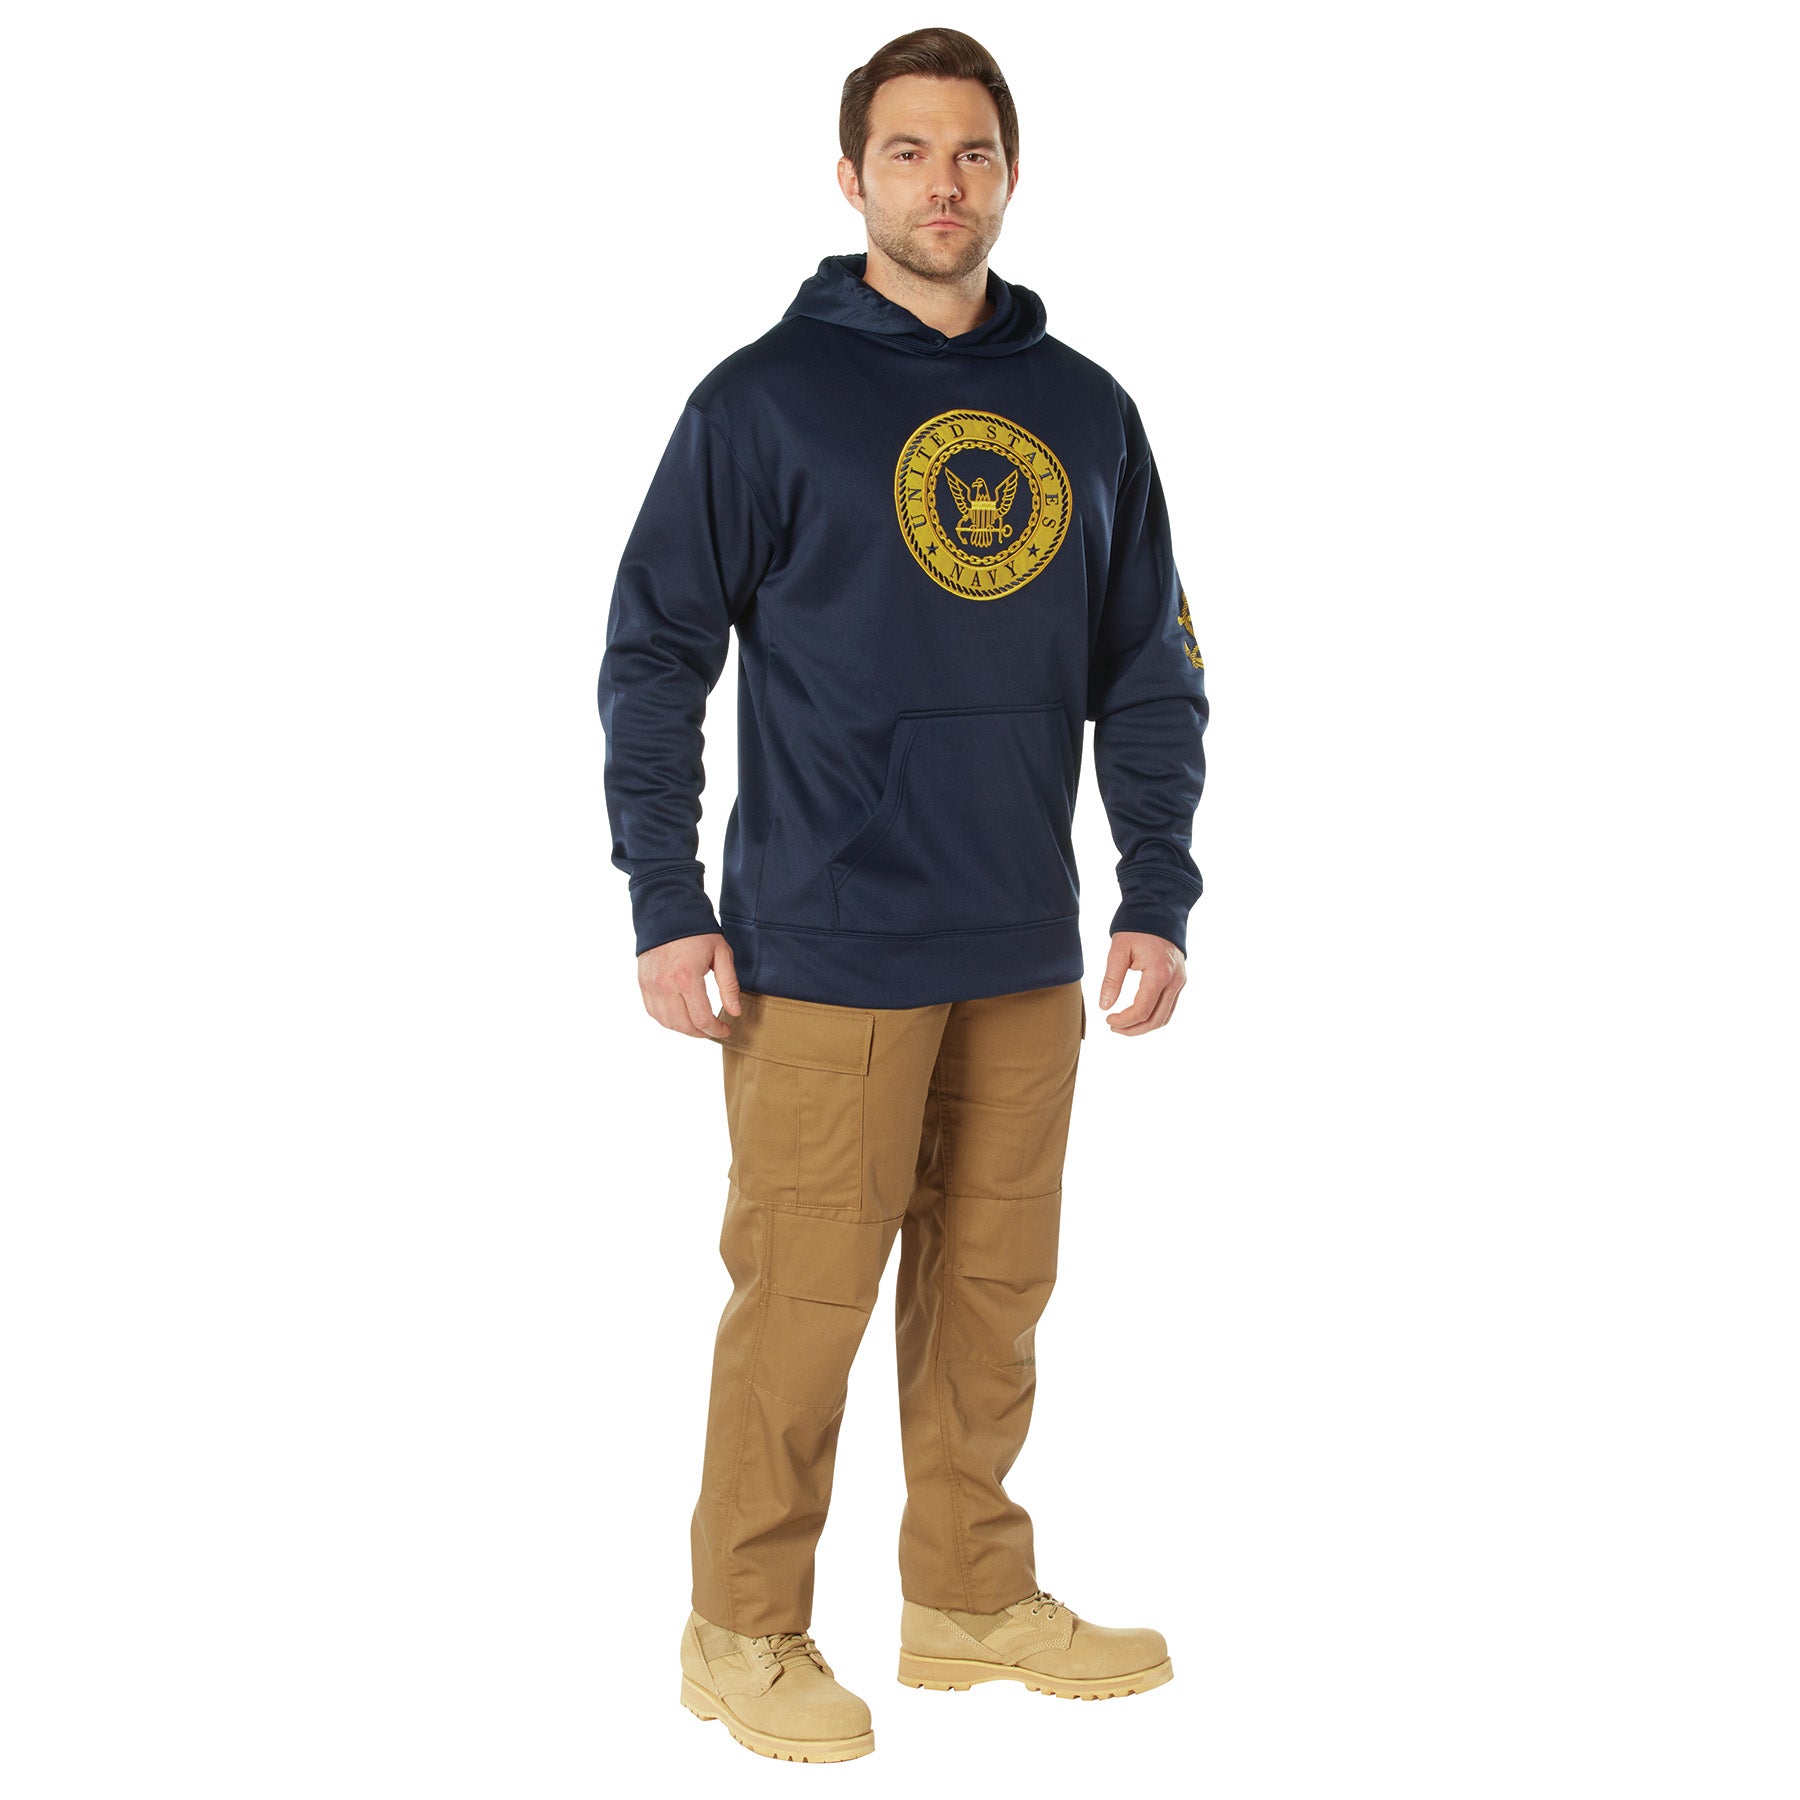 Poly Military Navy Emblem Embroidered Hooded Sweatshirts